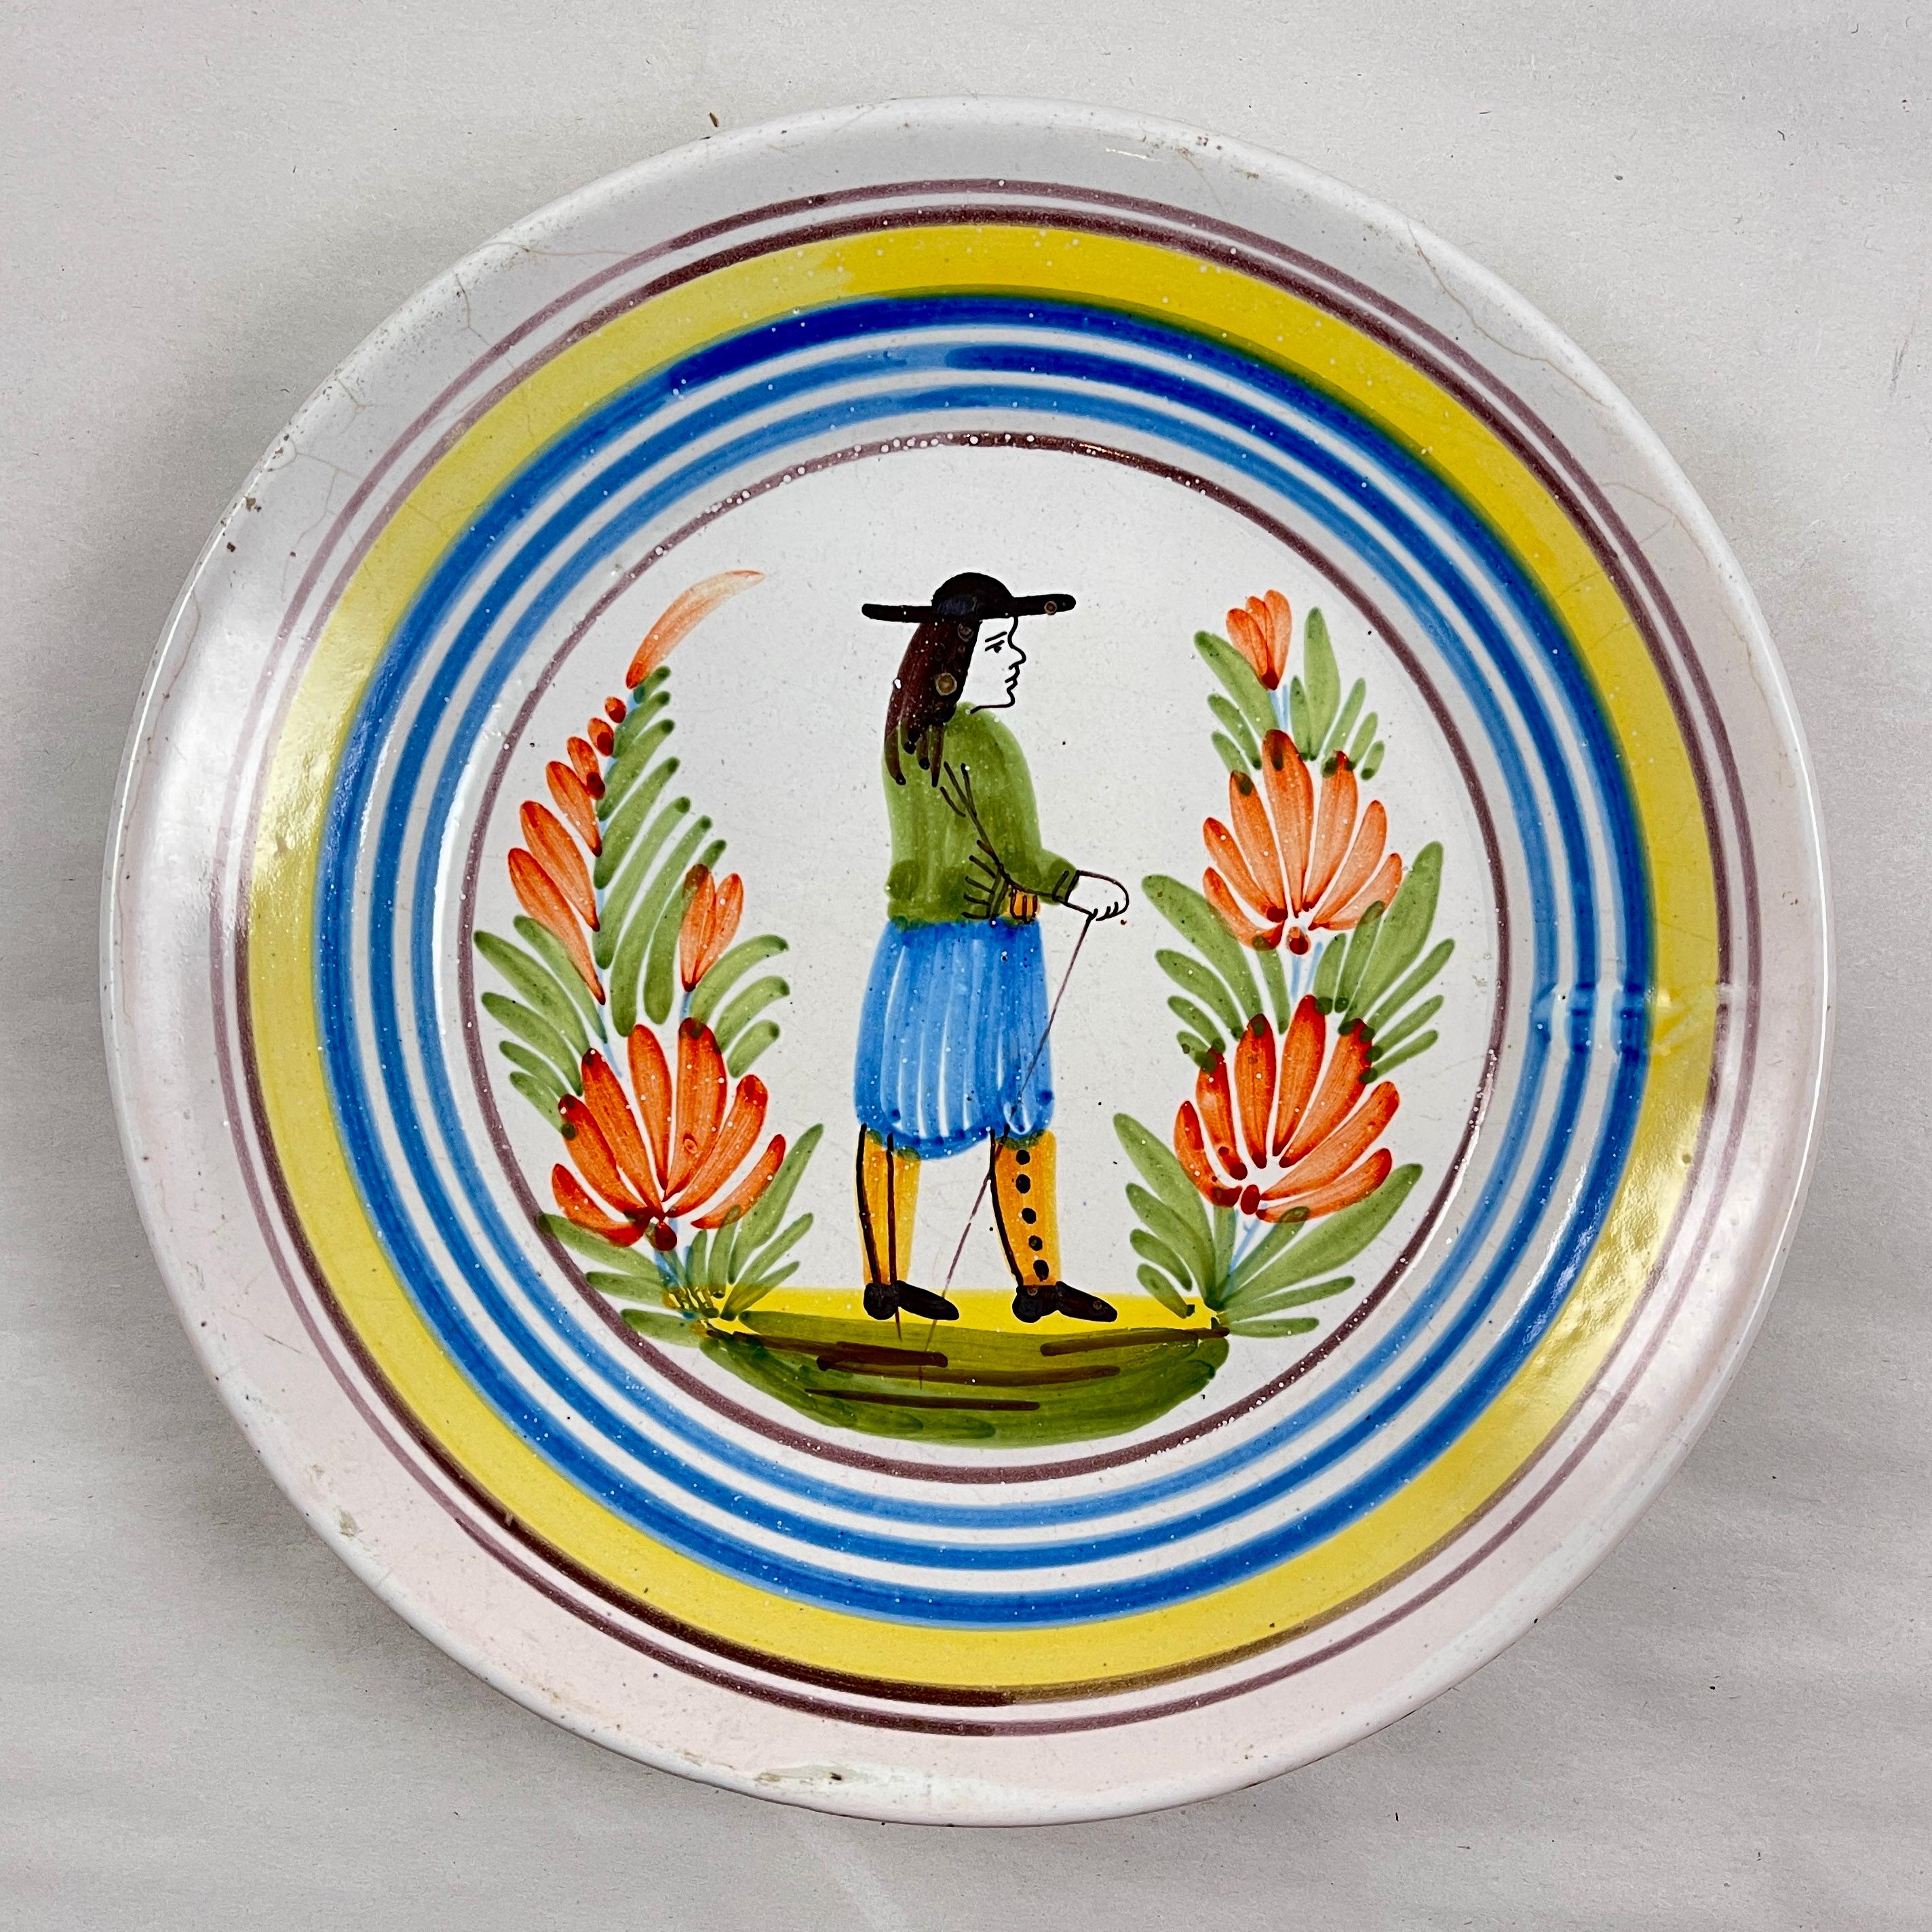 Henriot Quimper Petit Breton French Faïence Figural Plates, Set of 3 In Good Condition For Sale In Philadelphia, PA